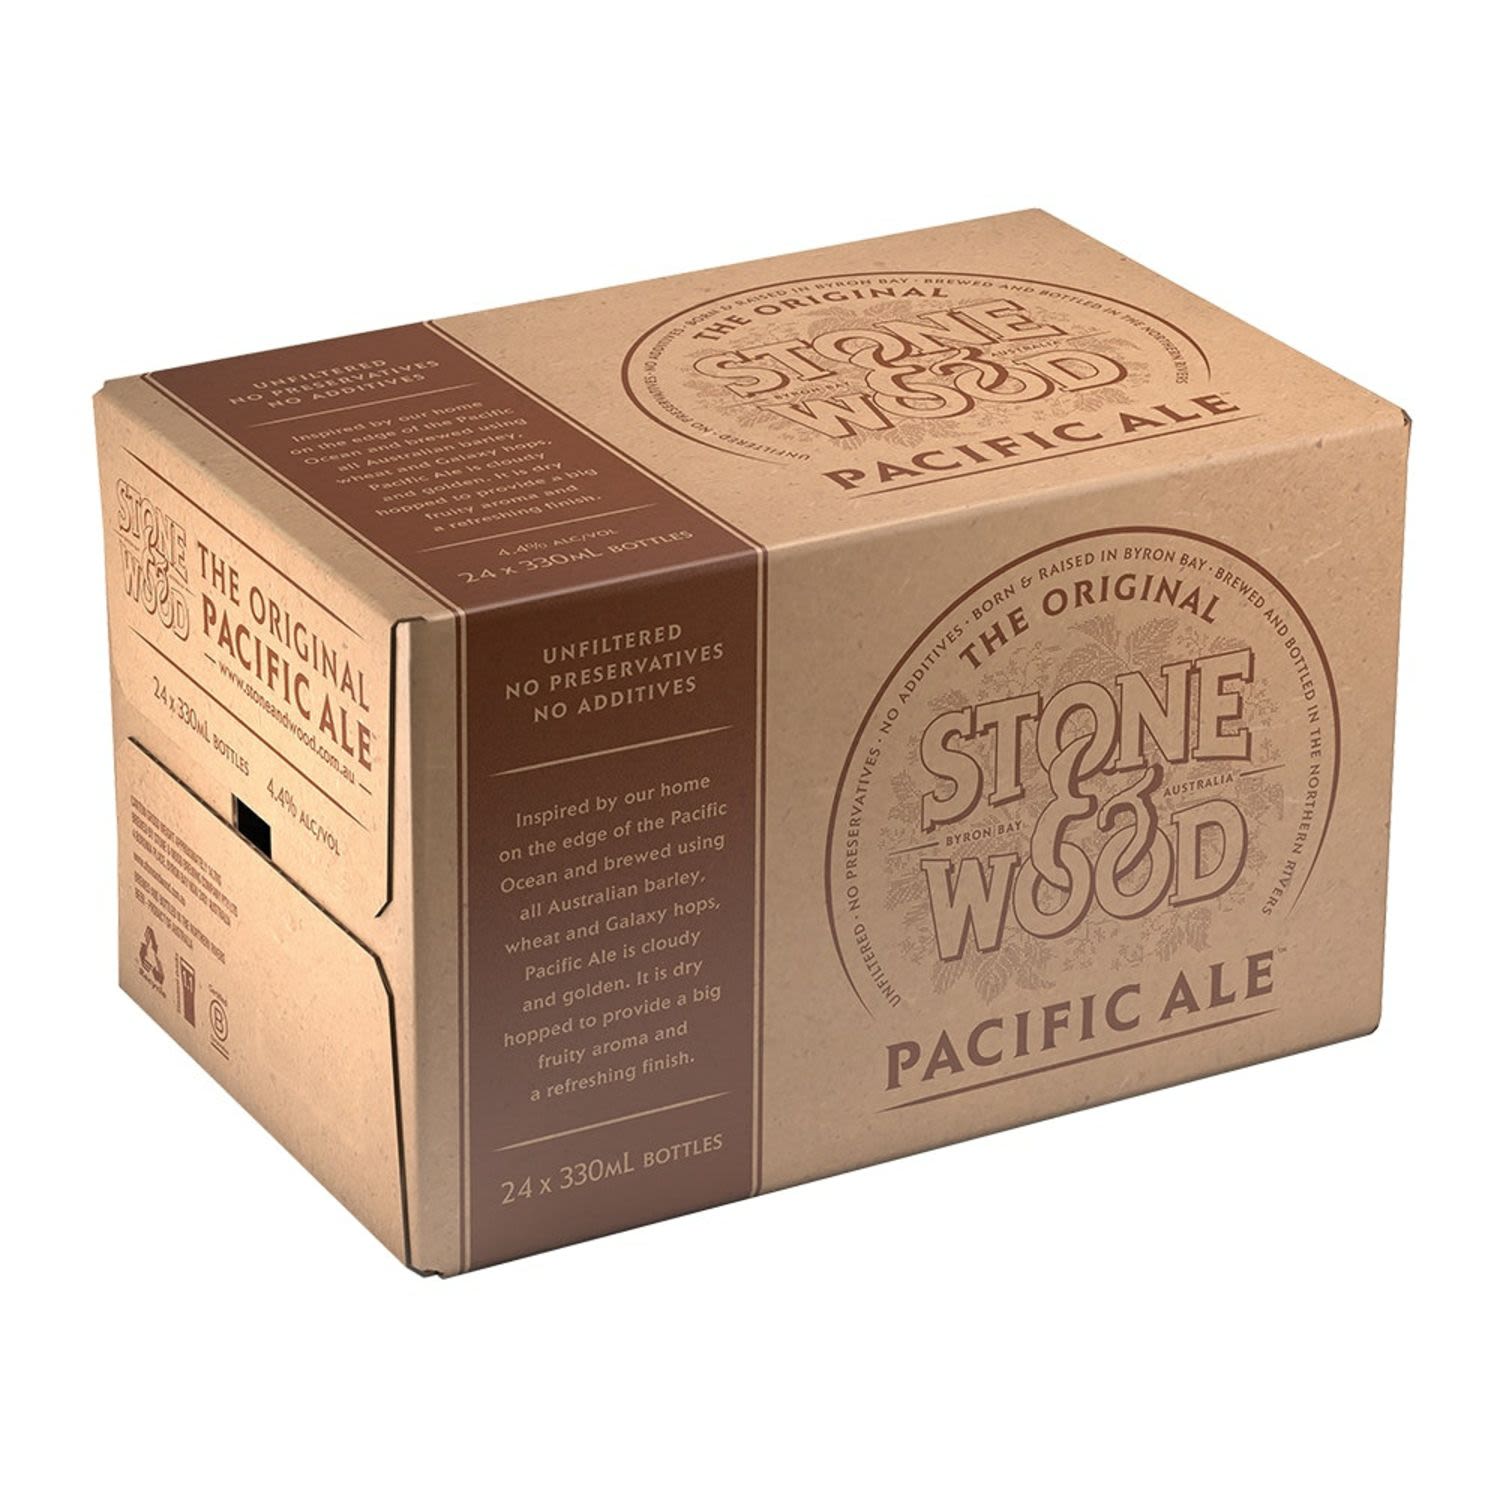 Stone & Wood Pacific Ale Bottle 330mL 24 Pack